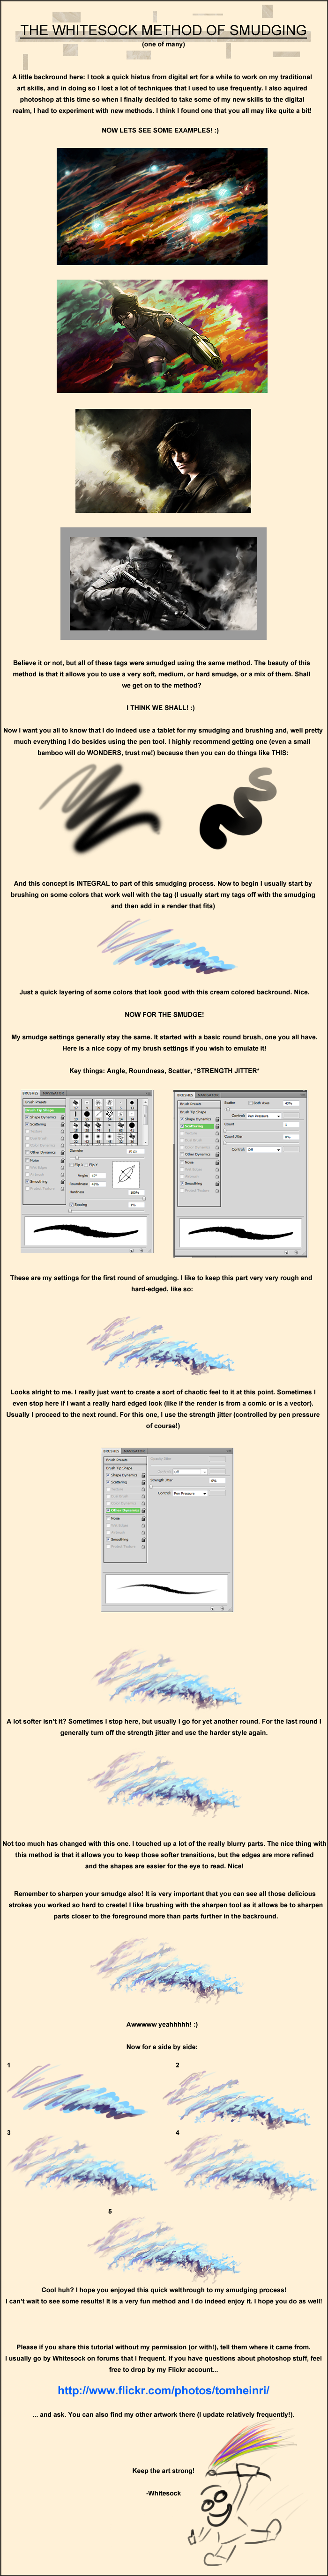 smudge_tutorial_by_white_sock-d3emp27.png